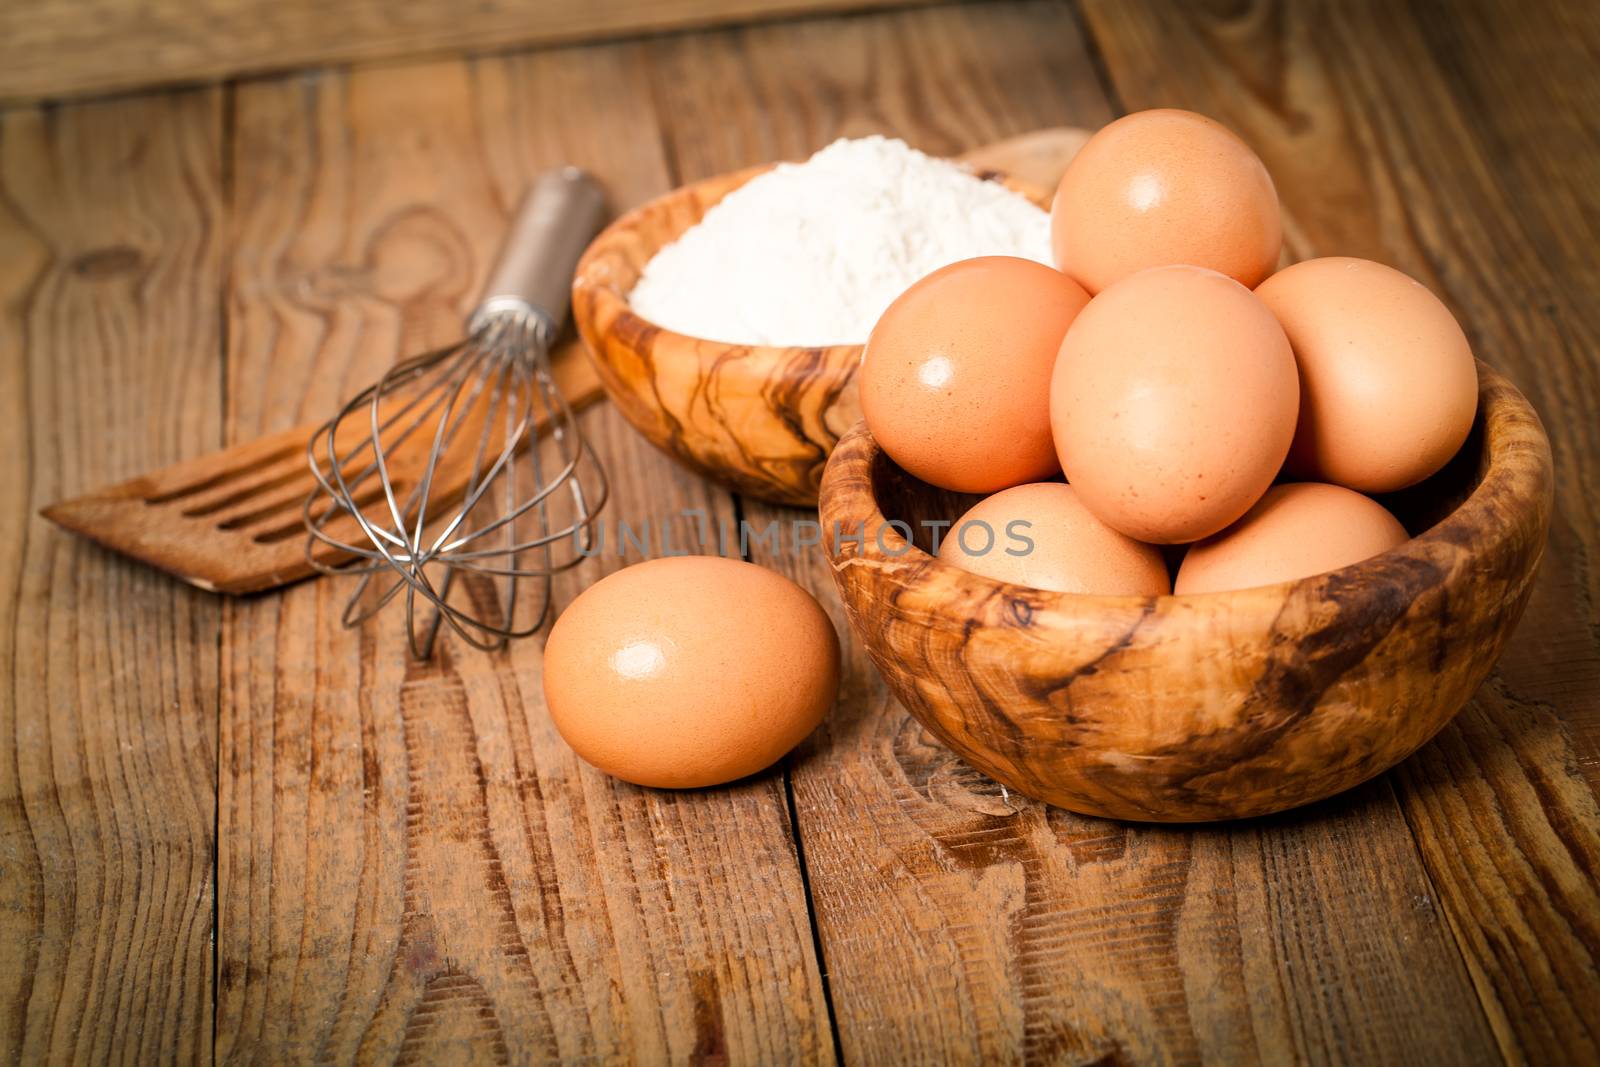 flour and eggs, ingredients for baking. on wooden background